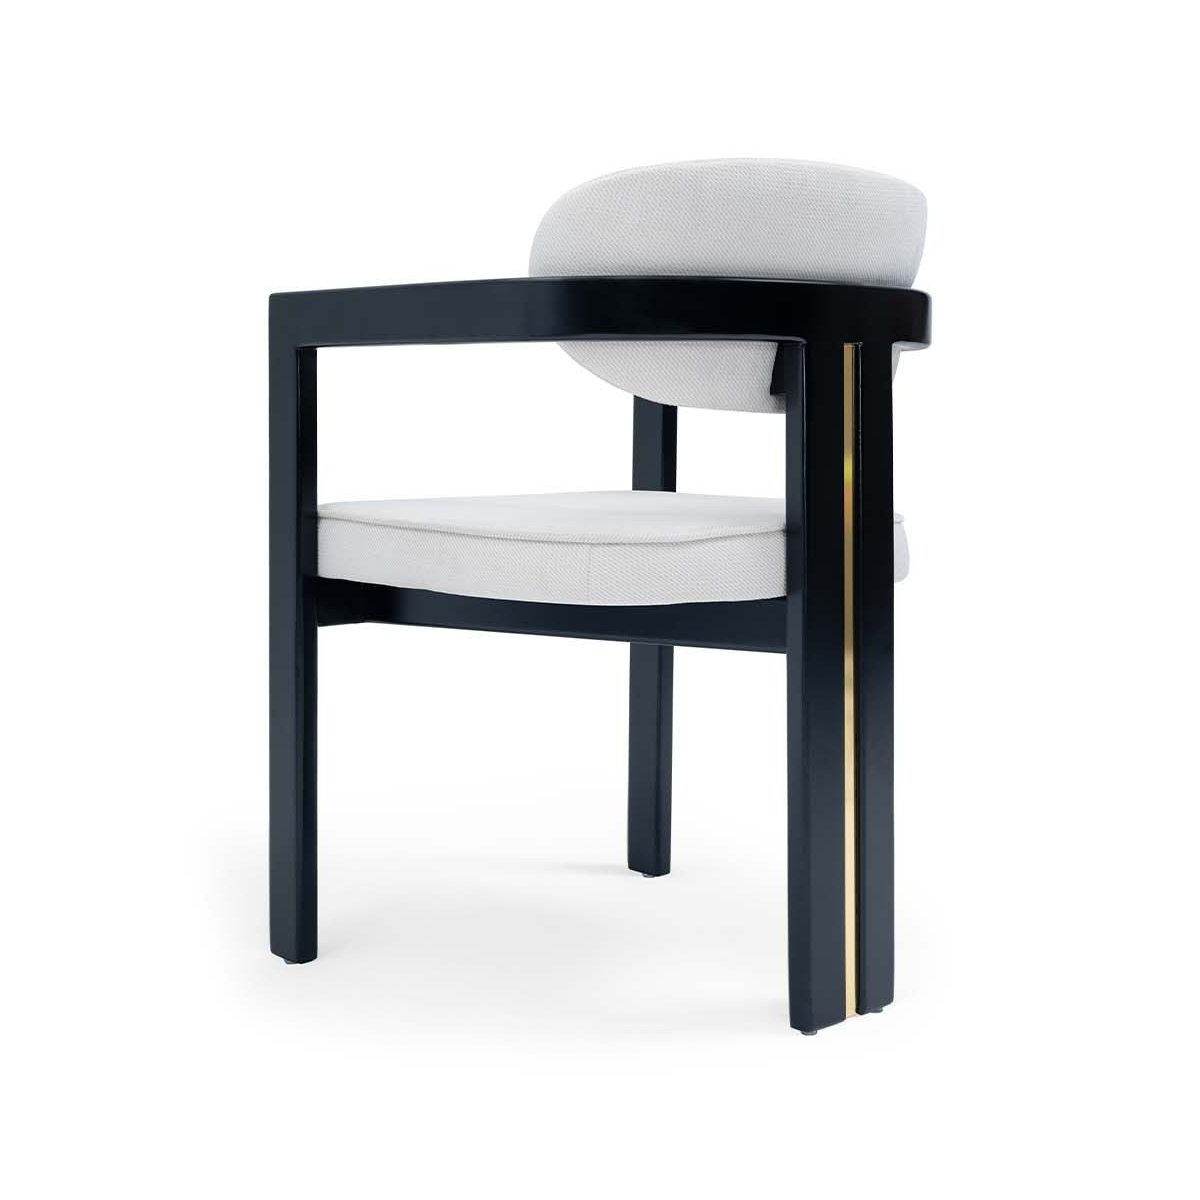 Notte Chair